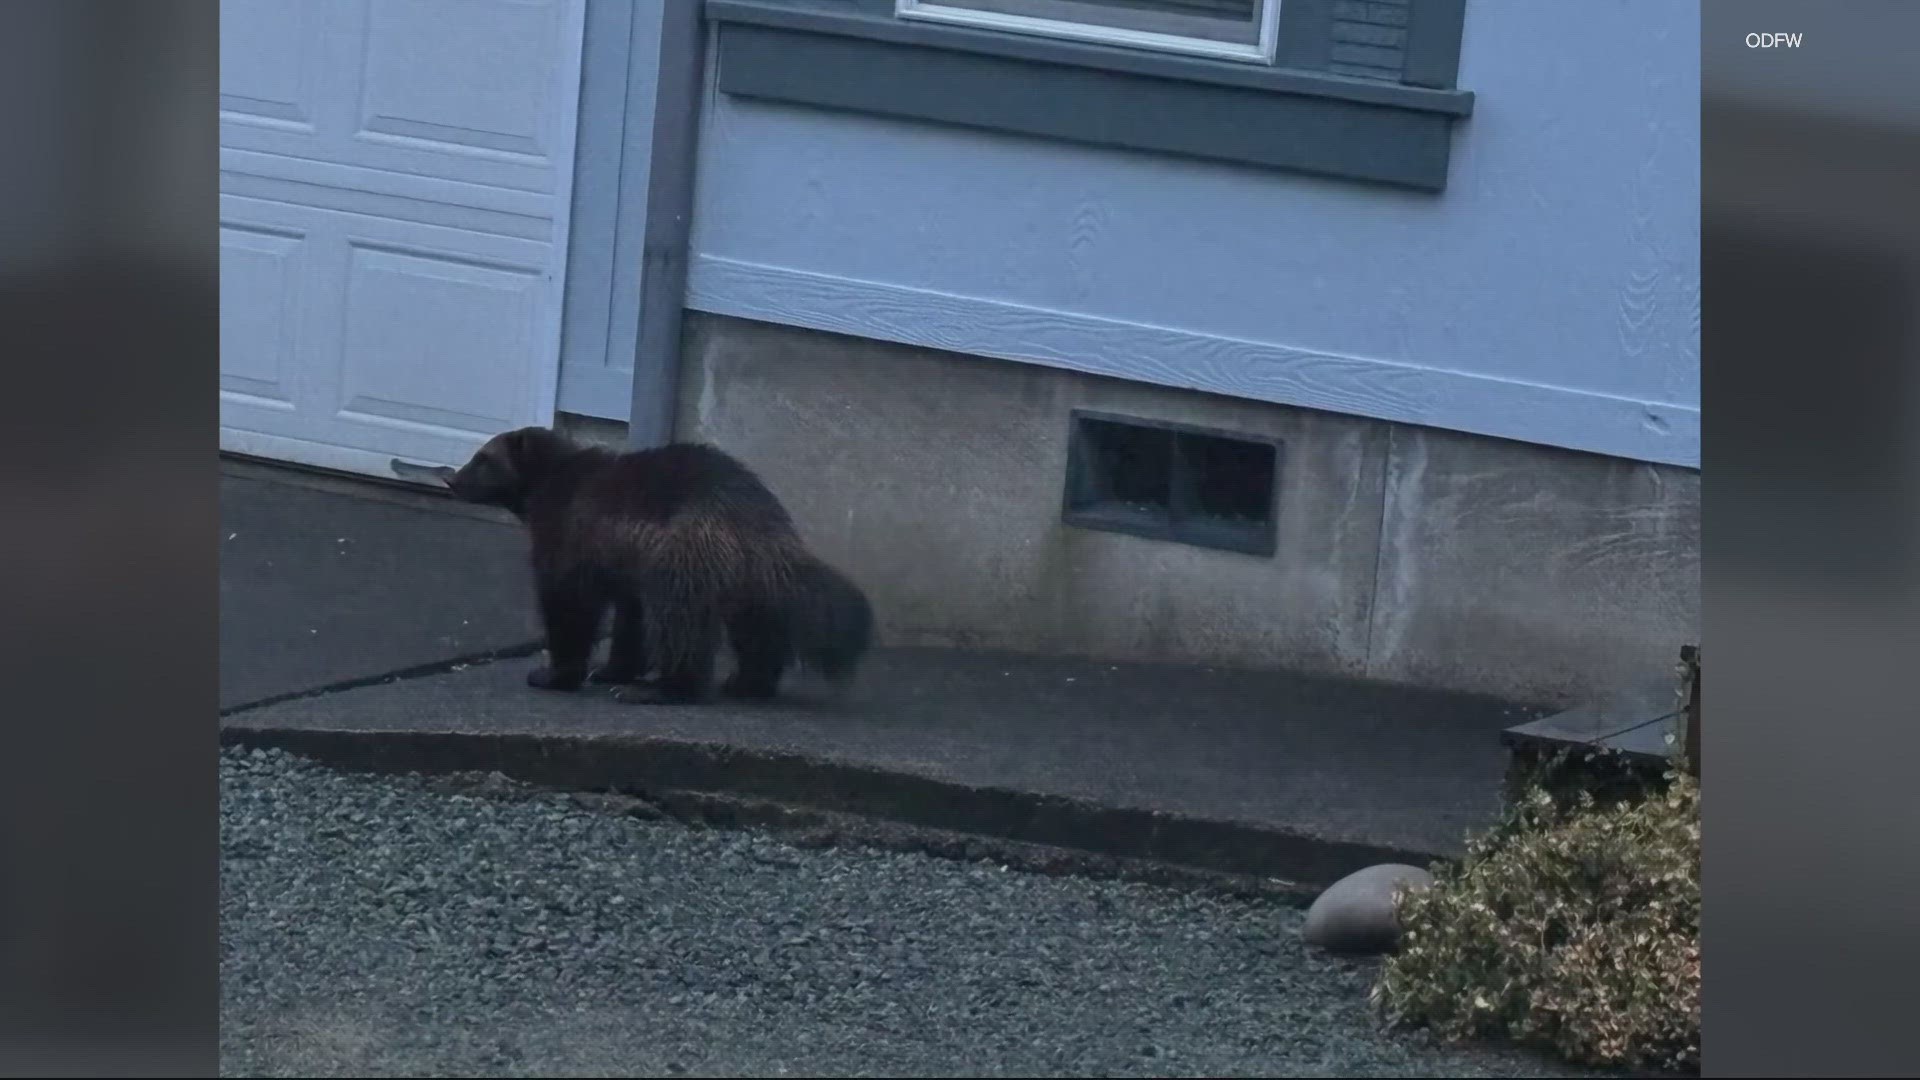 Wolverines have been recently reported in Nehalem, Netarts and Newport, according to the Oregon Department of Fish and Wildlife.